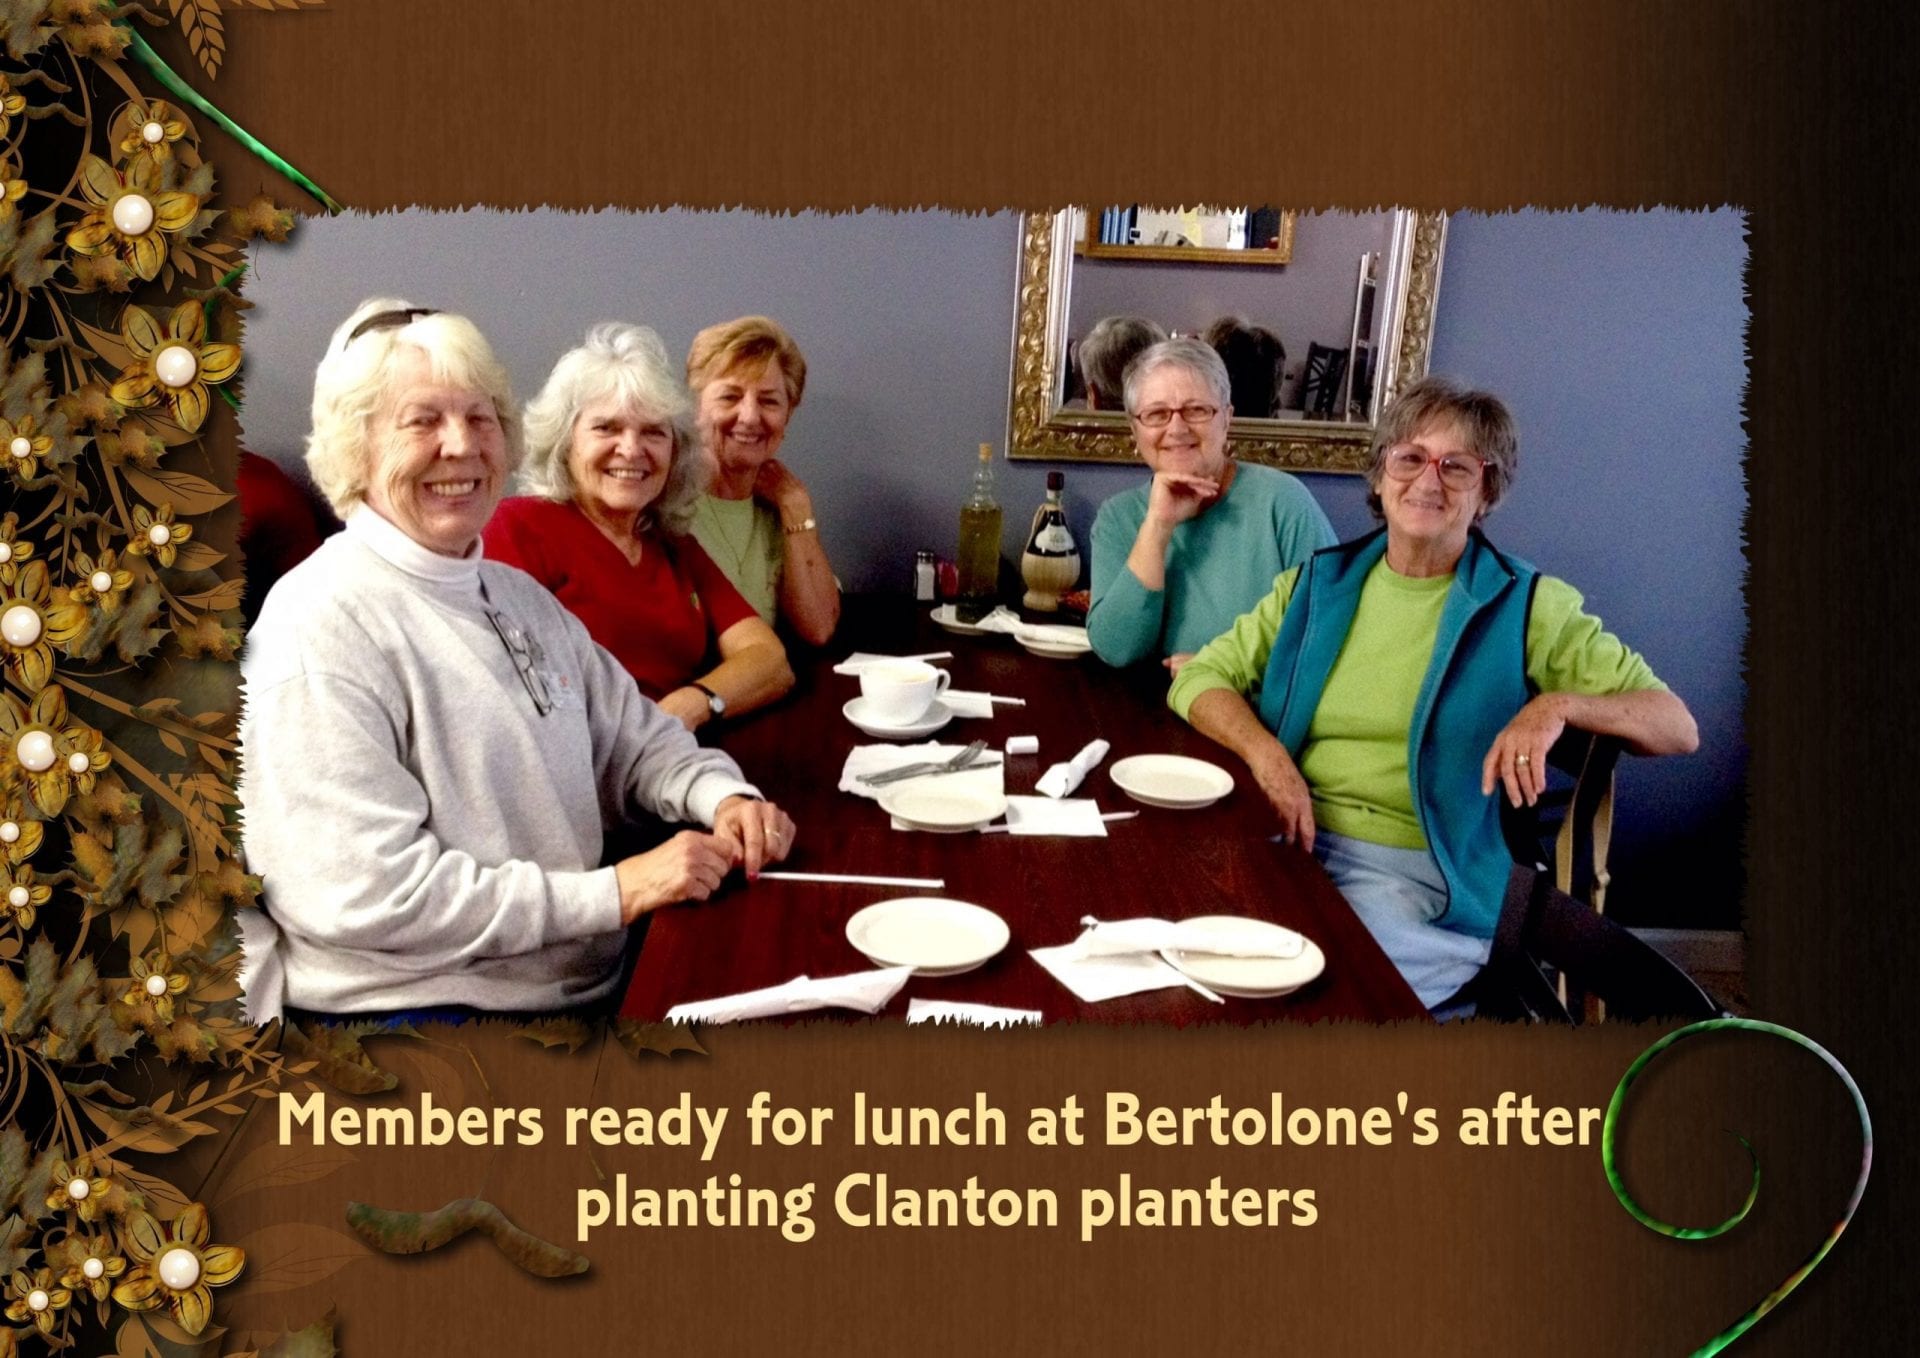 Members having lunch after planting